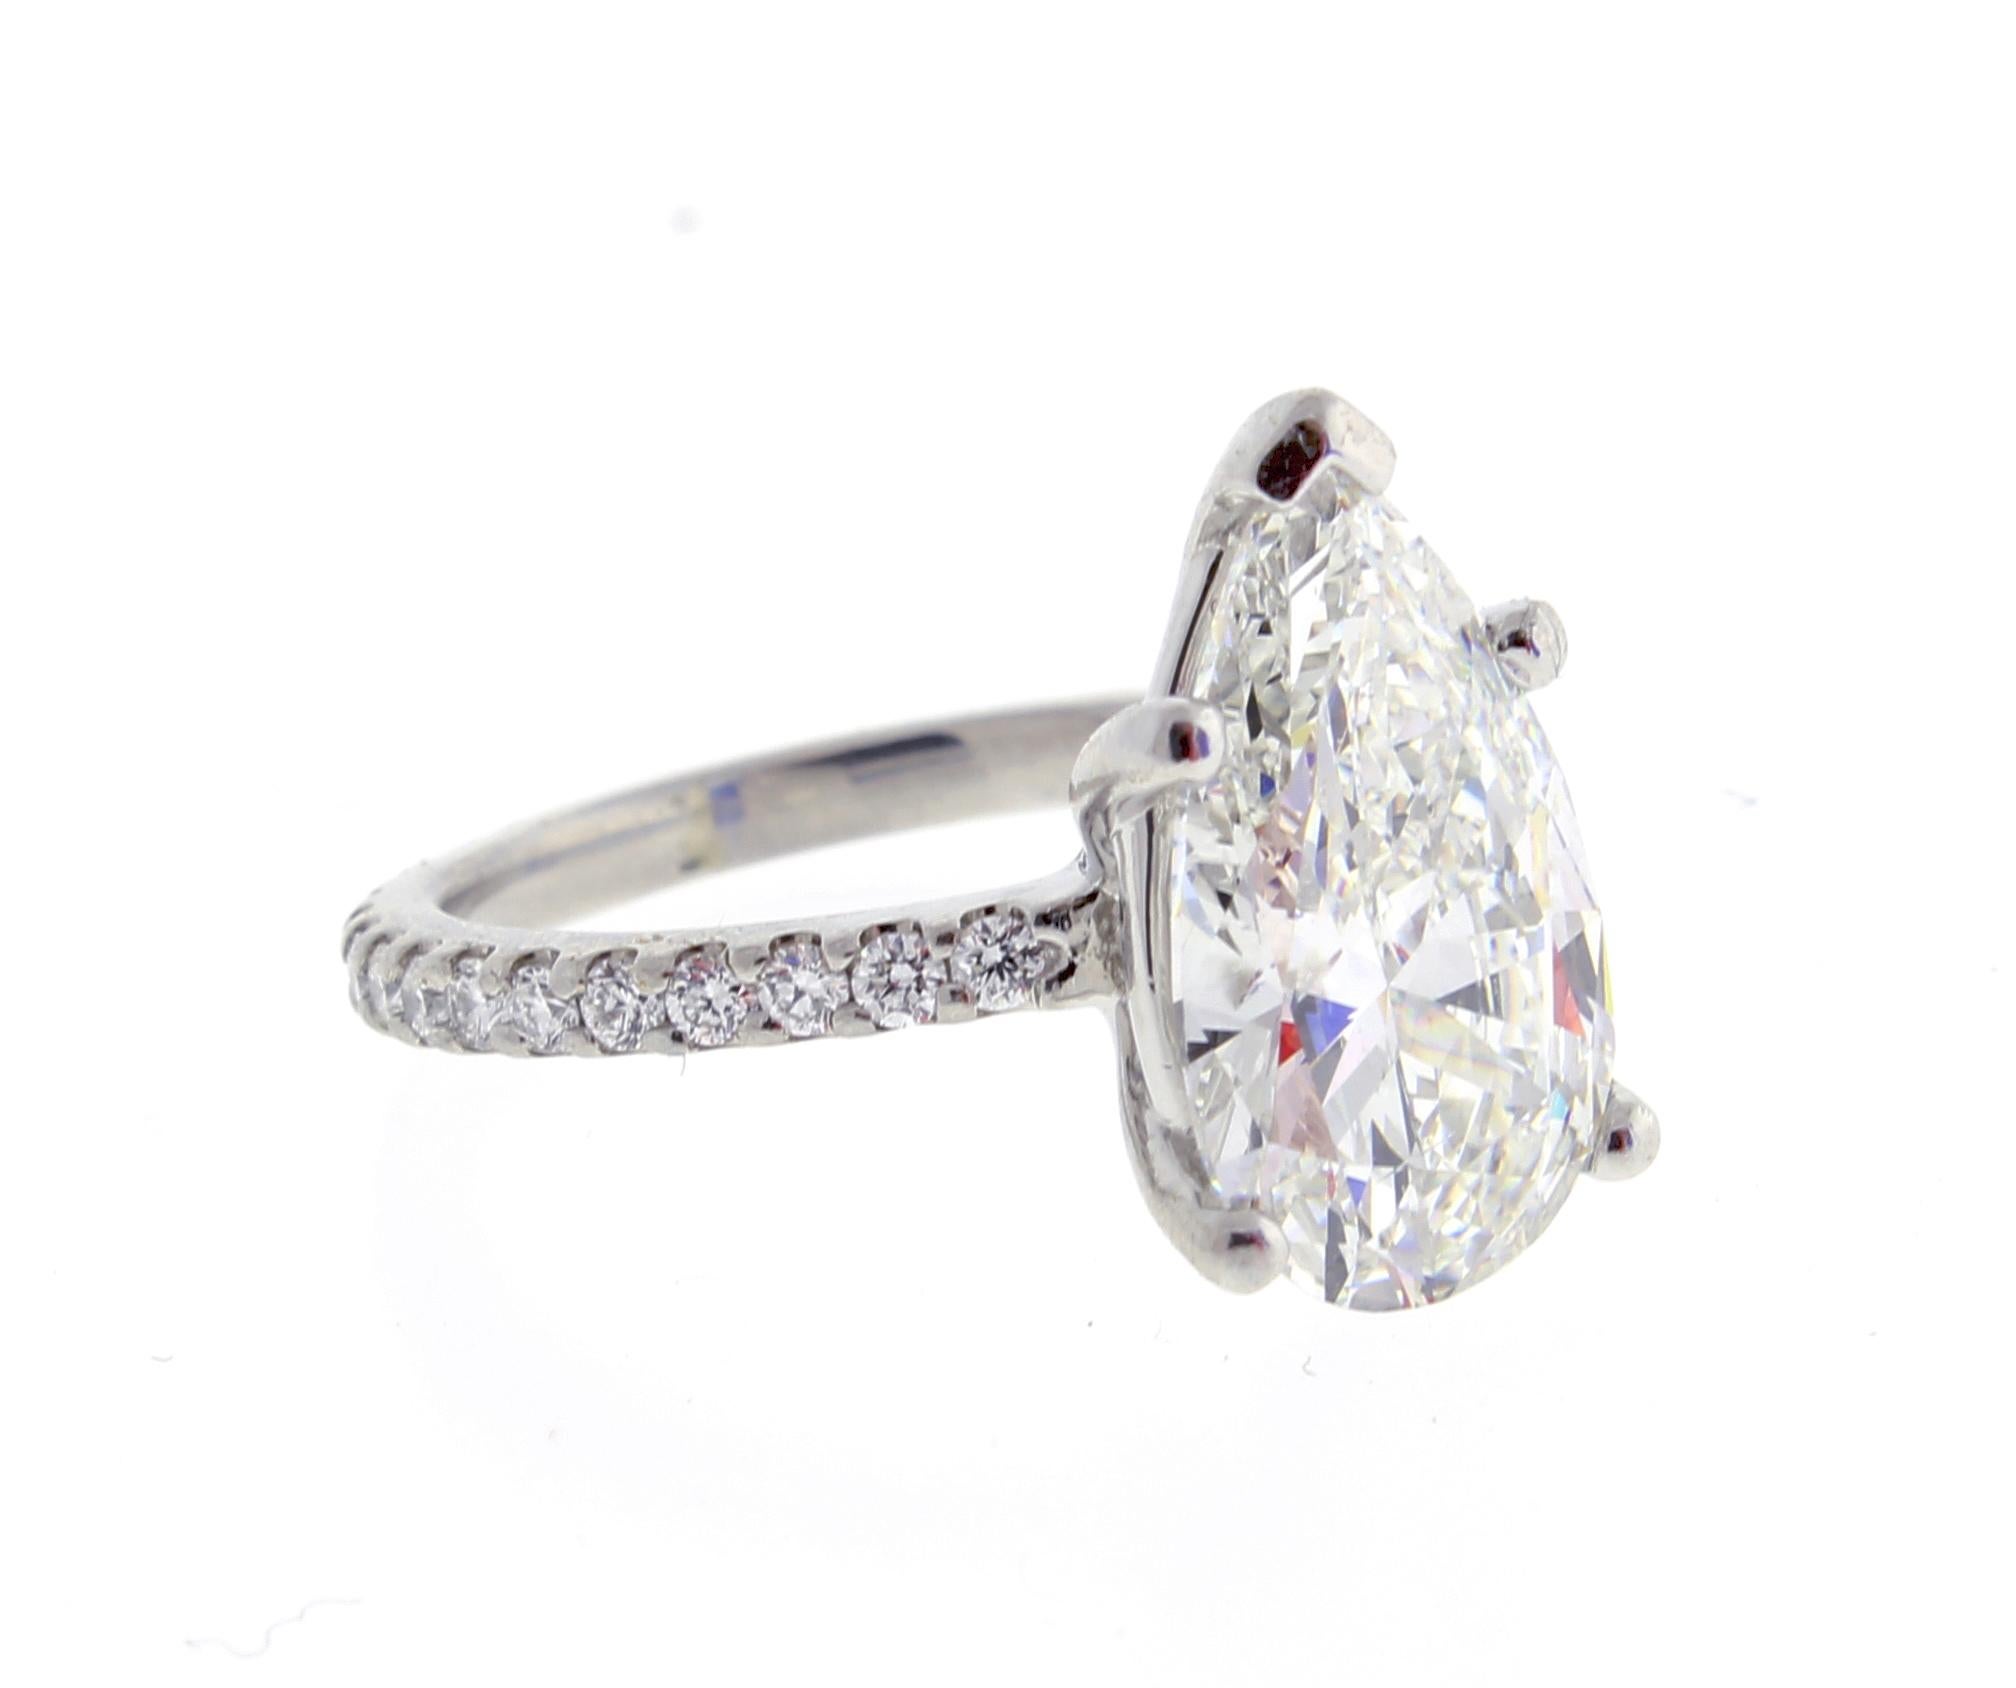 A 3.06 Carat G.I.A certified pear shape diamond ring. 
♦ Metal: Platinum
♦  Diamond  = 3.06 l carats G SI2  GIA
♦ Circa 2008
♦ Size 5, Resizable 
♦ Packaging: presentation box 
♦ Condition: Excellent , pre-owned
♦ Price: Based on the market, prices